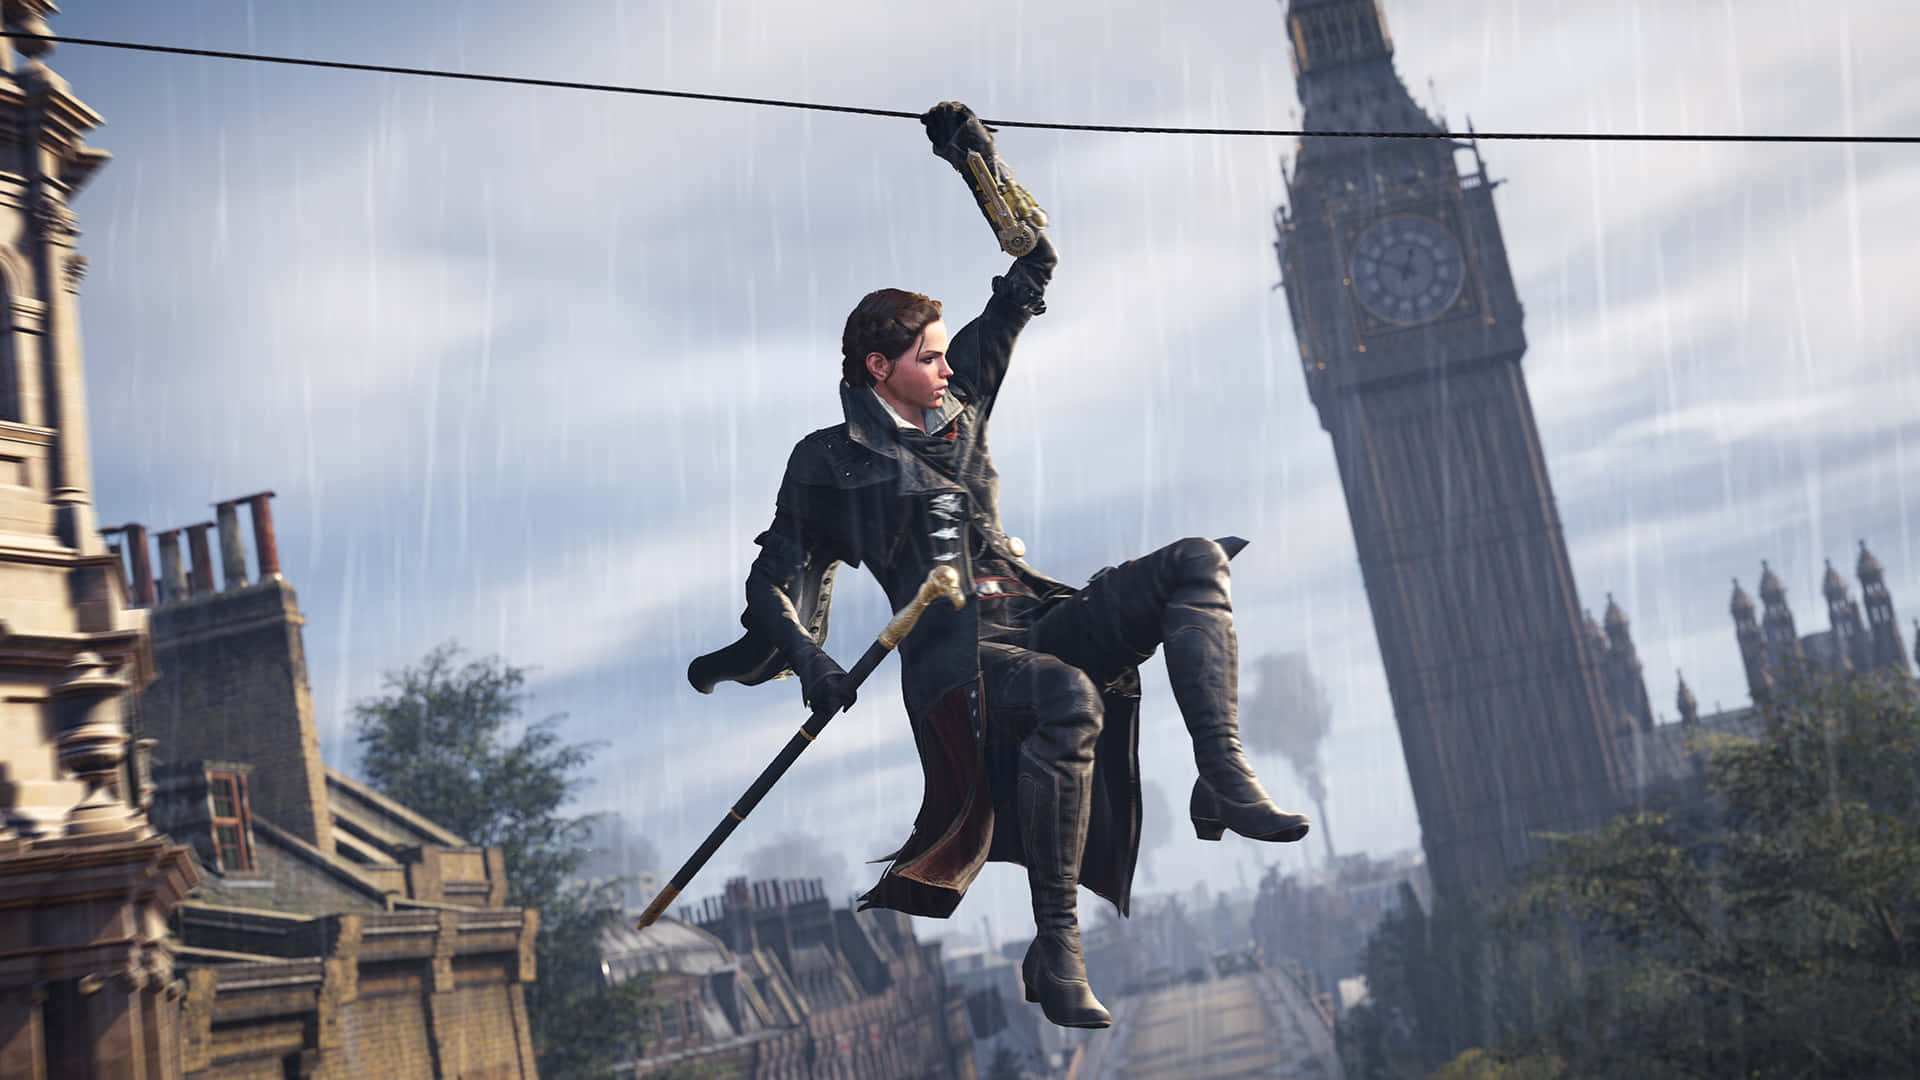 Cunning and Lethal - Evie Frye Assassin's Creed Syndicate Wallpaper